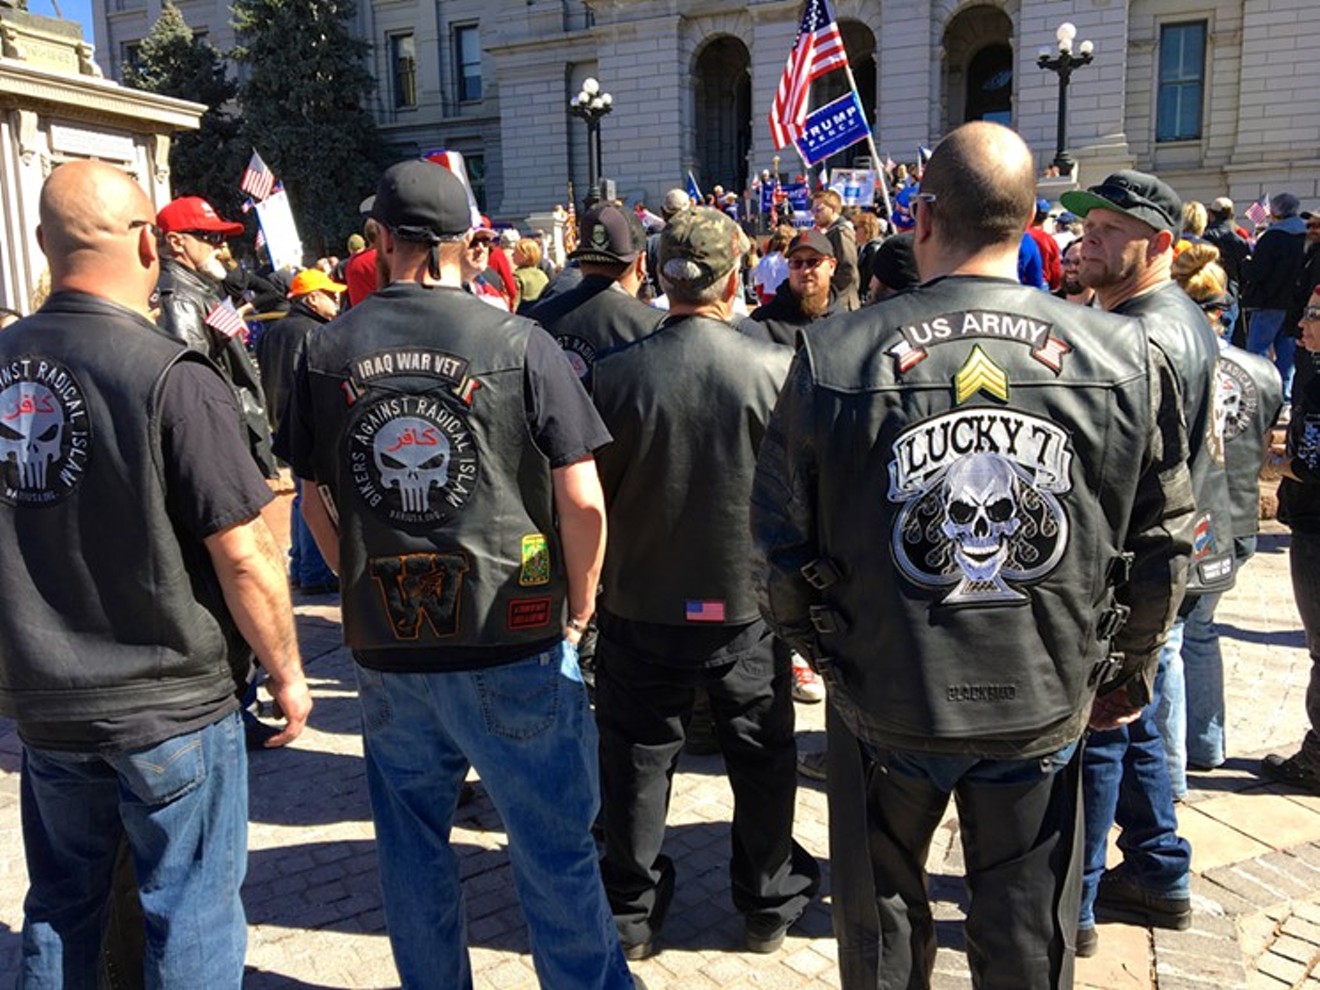 Things got a little ugly at a pro-Trump rally in Denver in March.